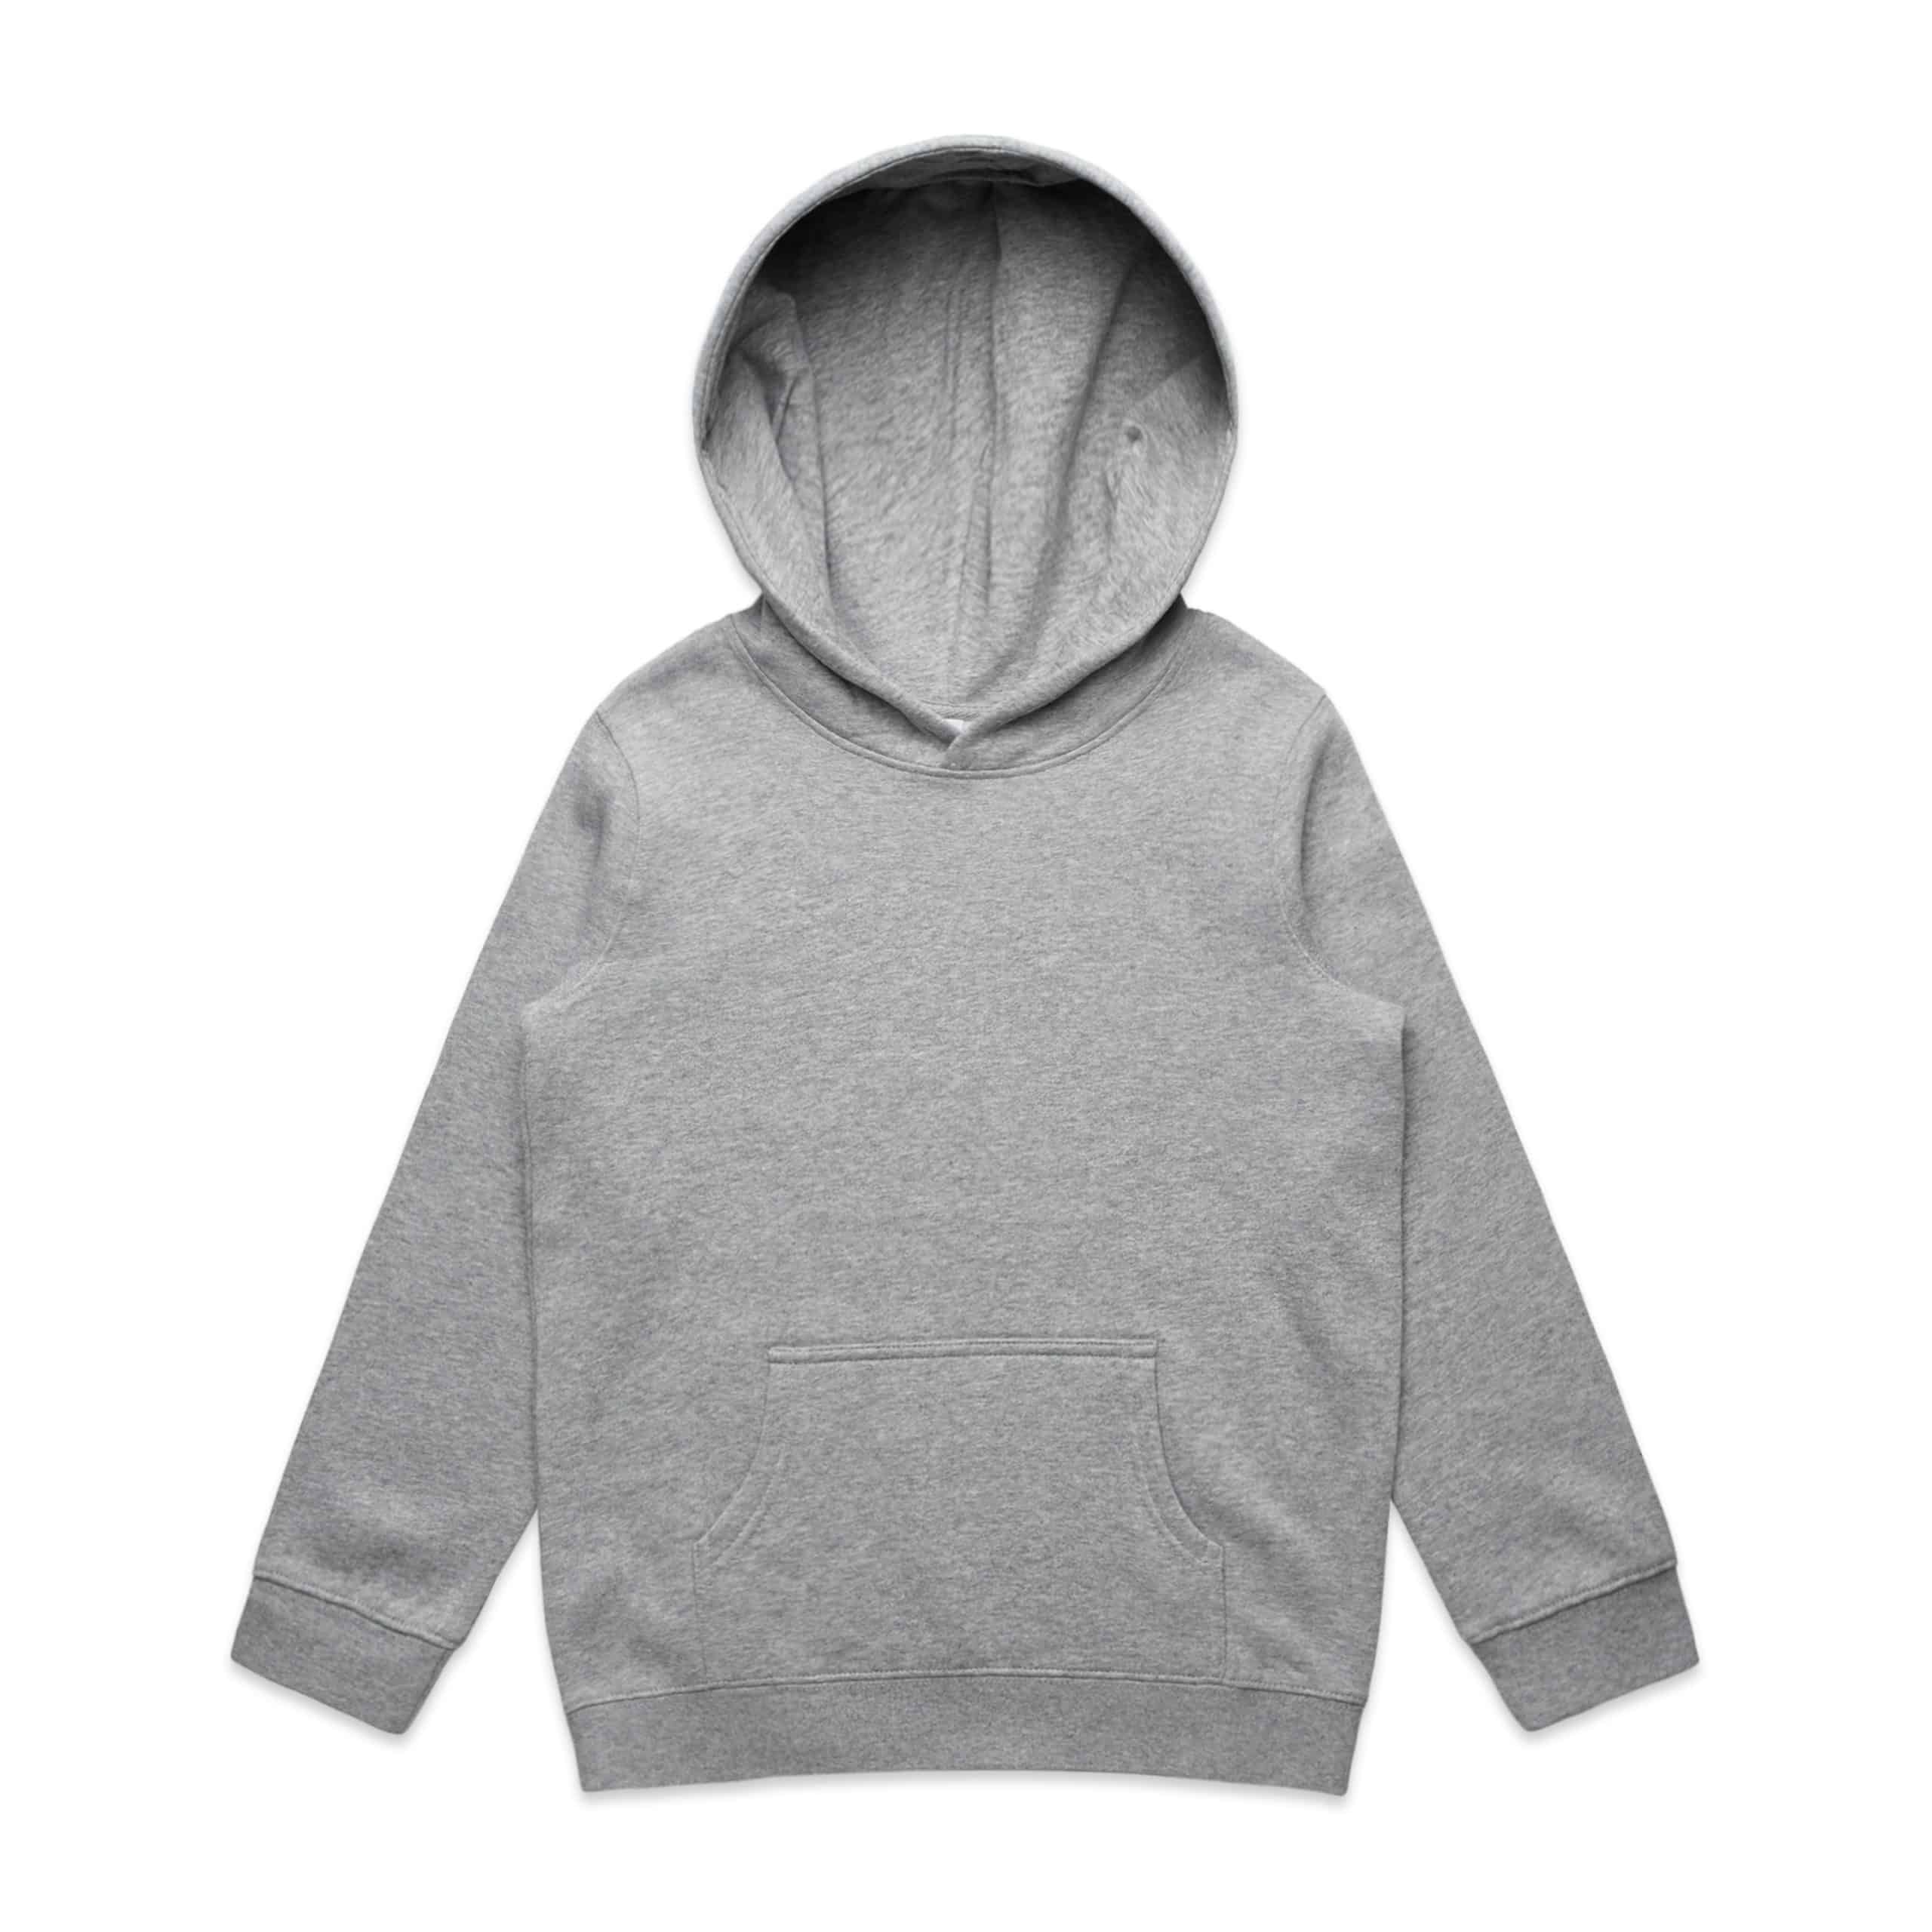 3033_AS_Youth-Supply-Hood_Grey-Marle-scaled